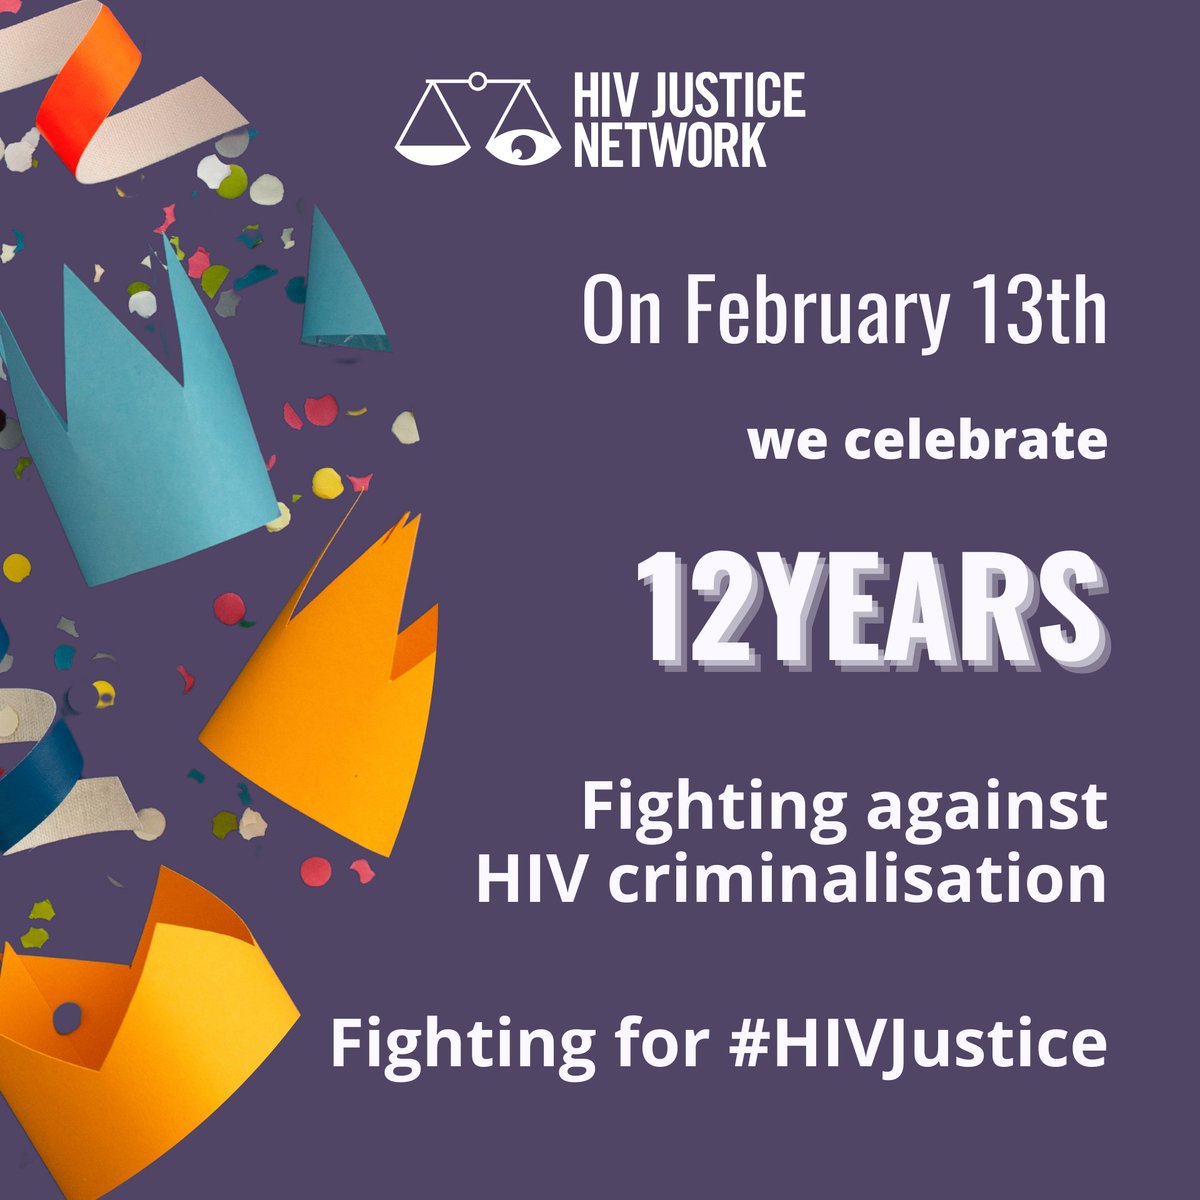 In 2012, the Oslo Declaration sparked a global movement against HIV criminalisation Learn more about its drafting and impact from some of the advocates behind this historic statement hivjustice.net/news/hiv-justi…